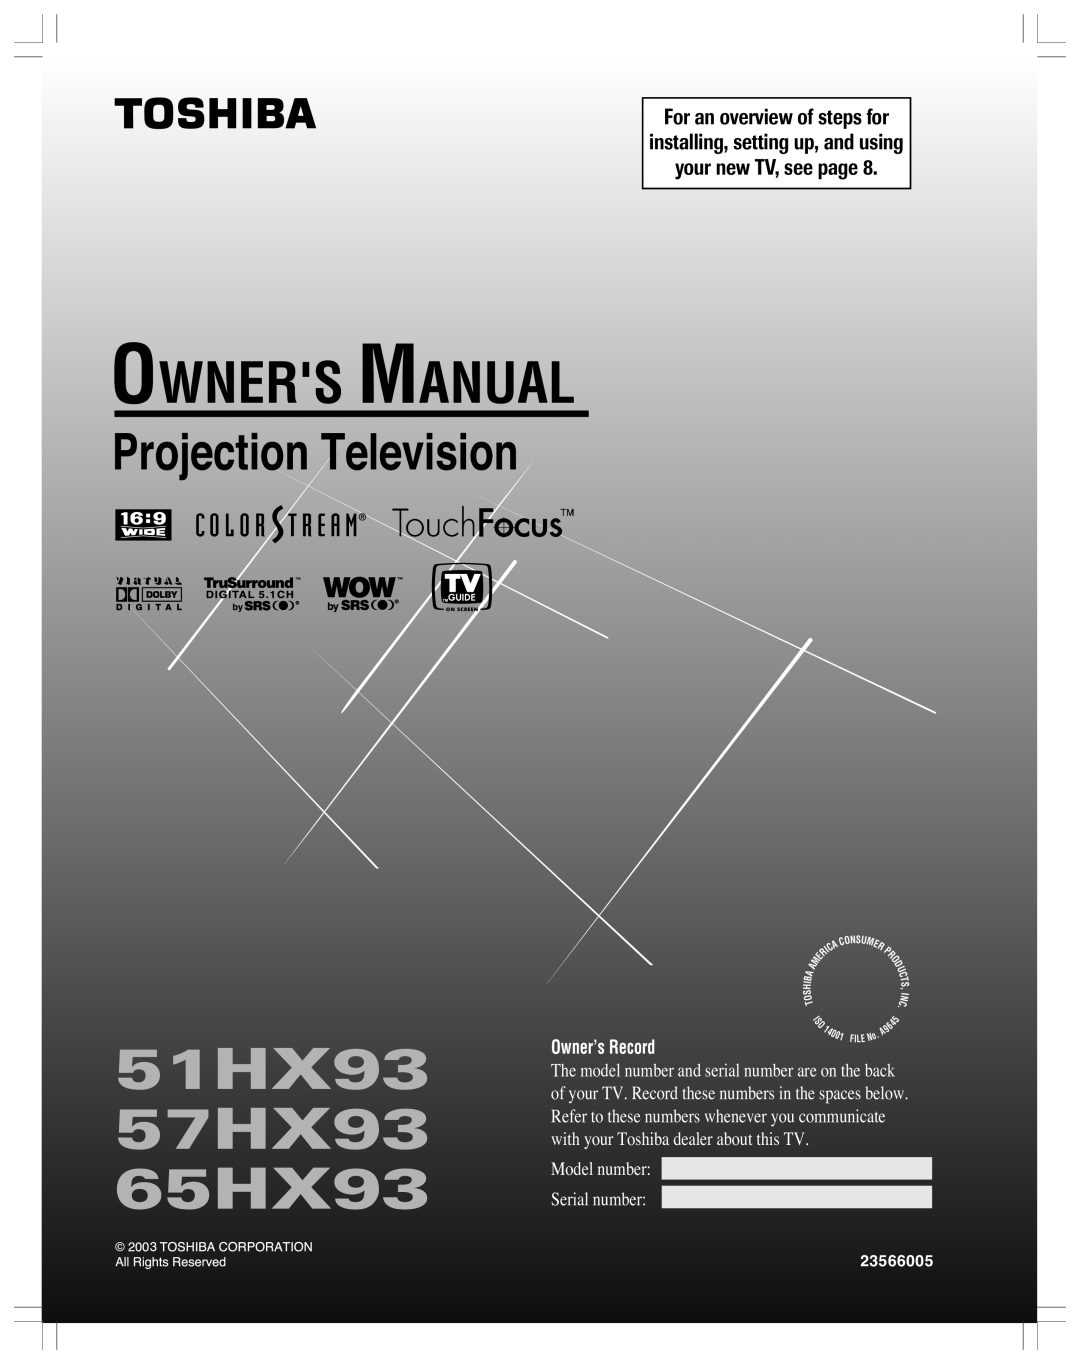 Toshiba 51HX93 owner manual For an overview of steps for installing, setting up, and using, your new TV, see page, Onsu 